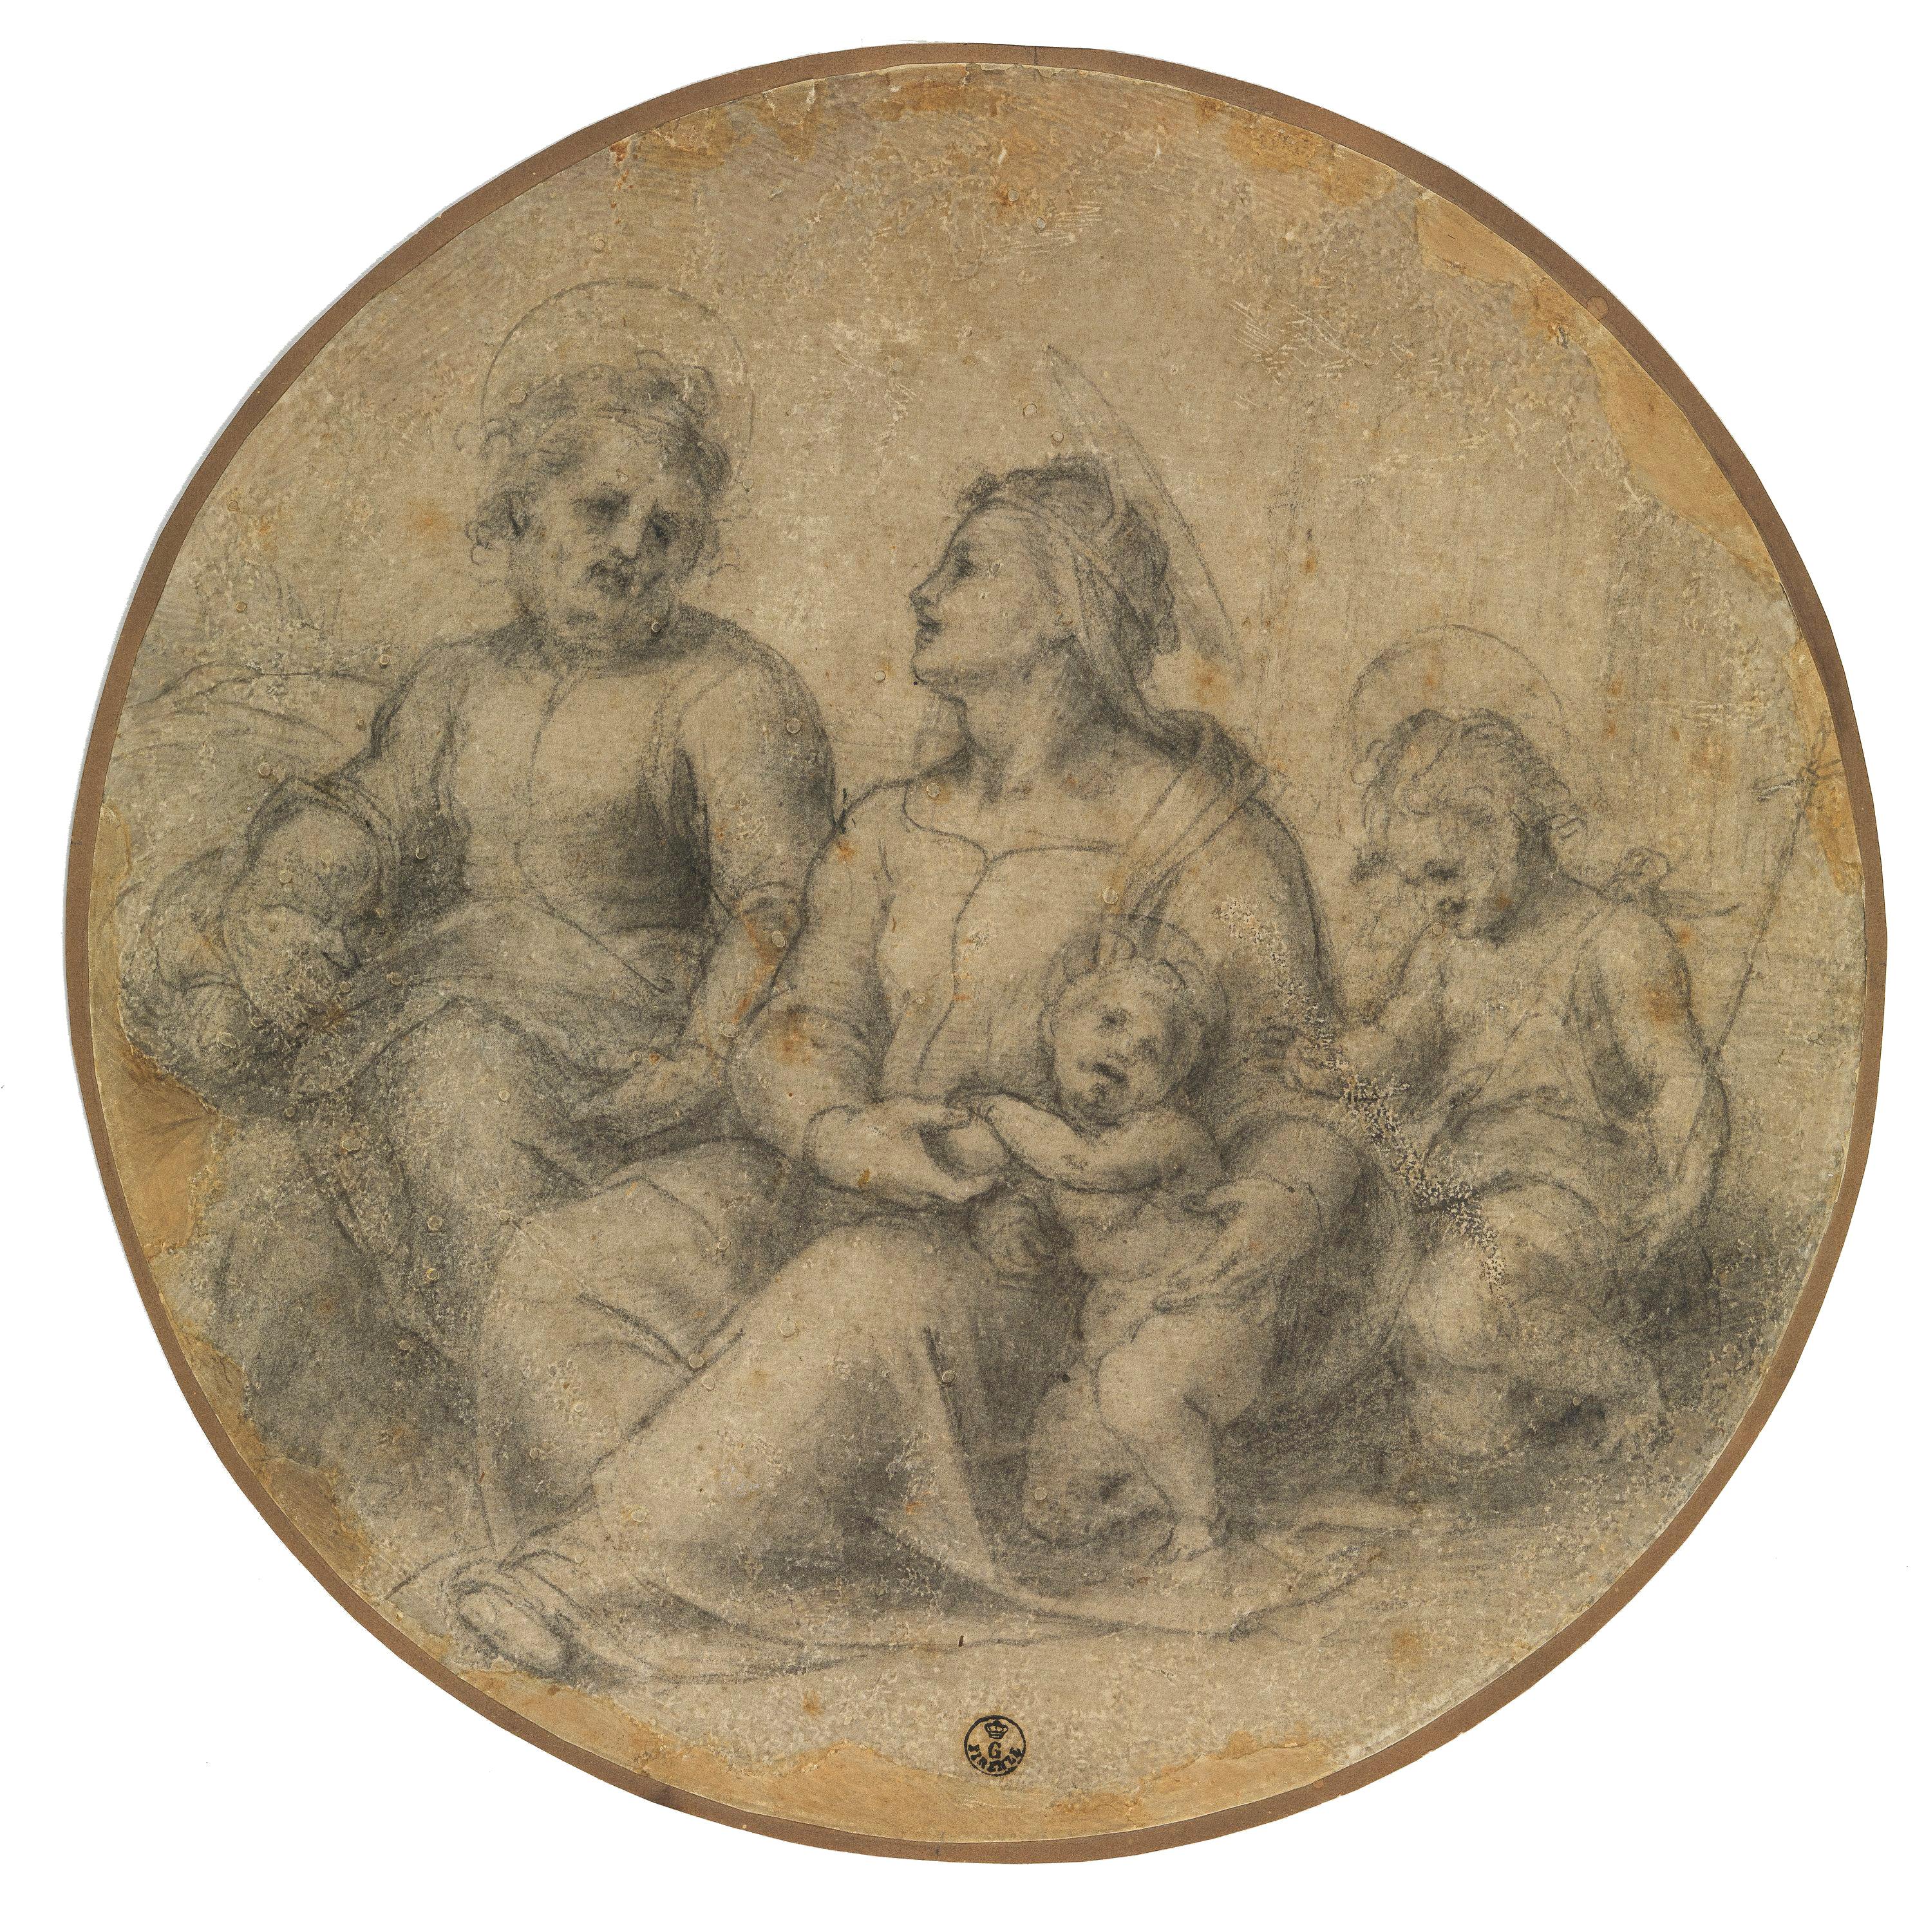 Madonna on the ground with Child, Saint Joseph and young Saint John